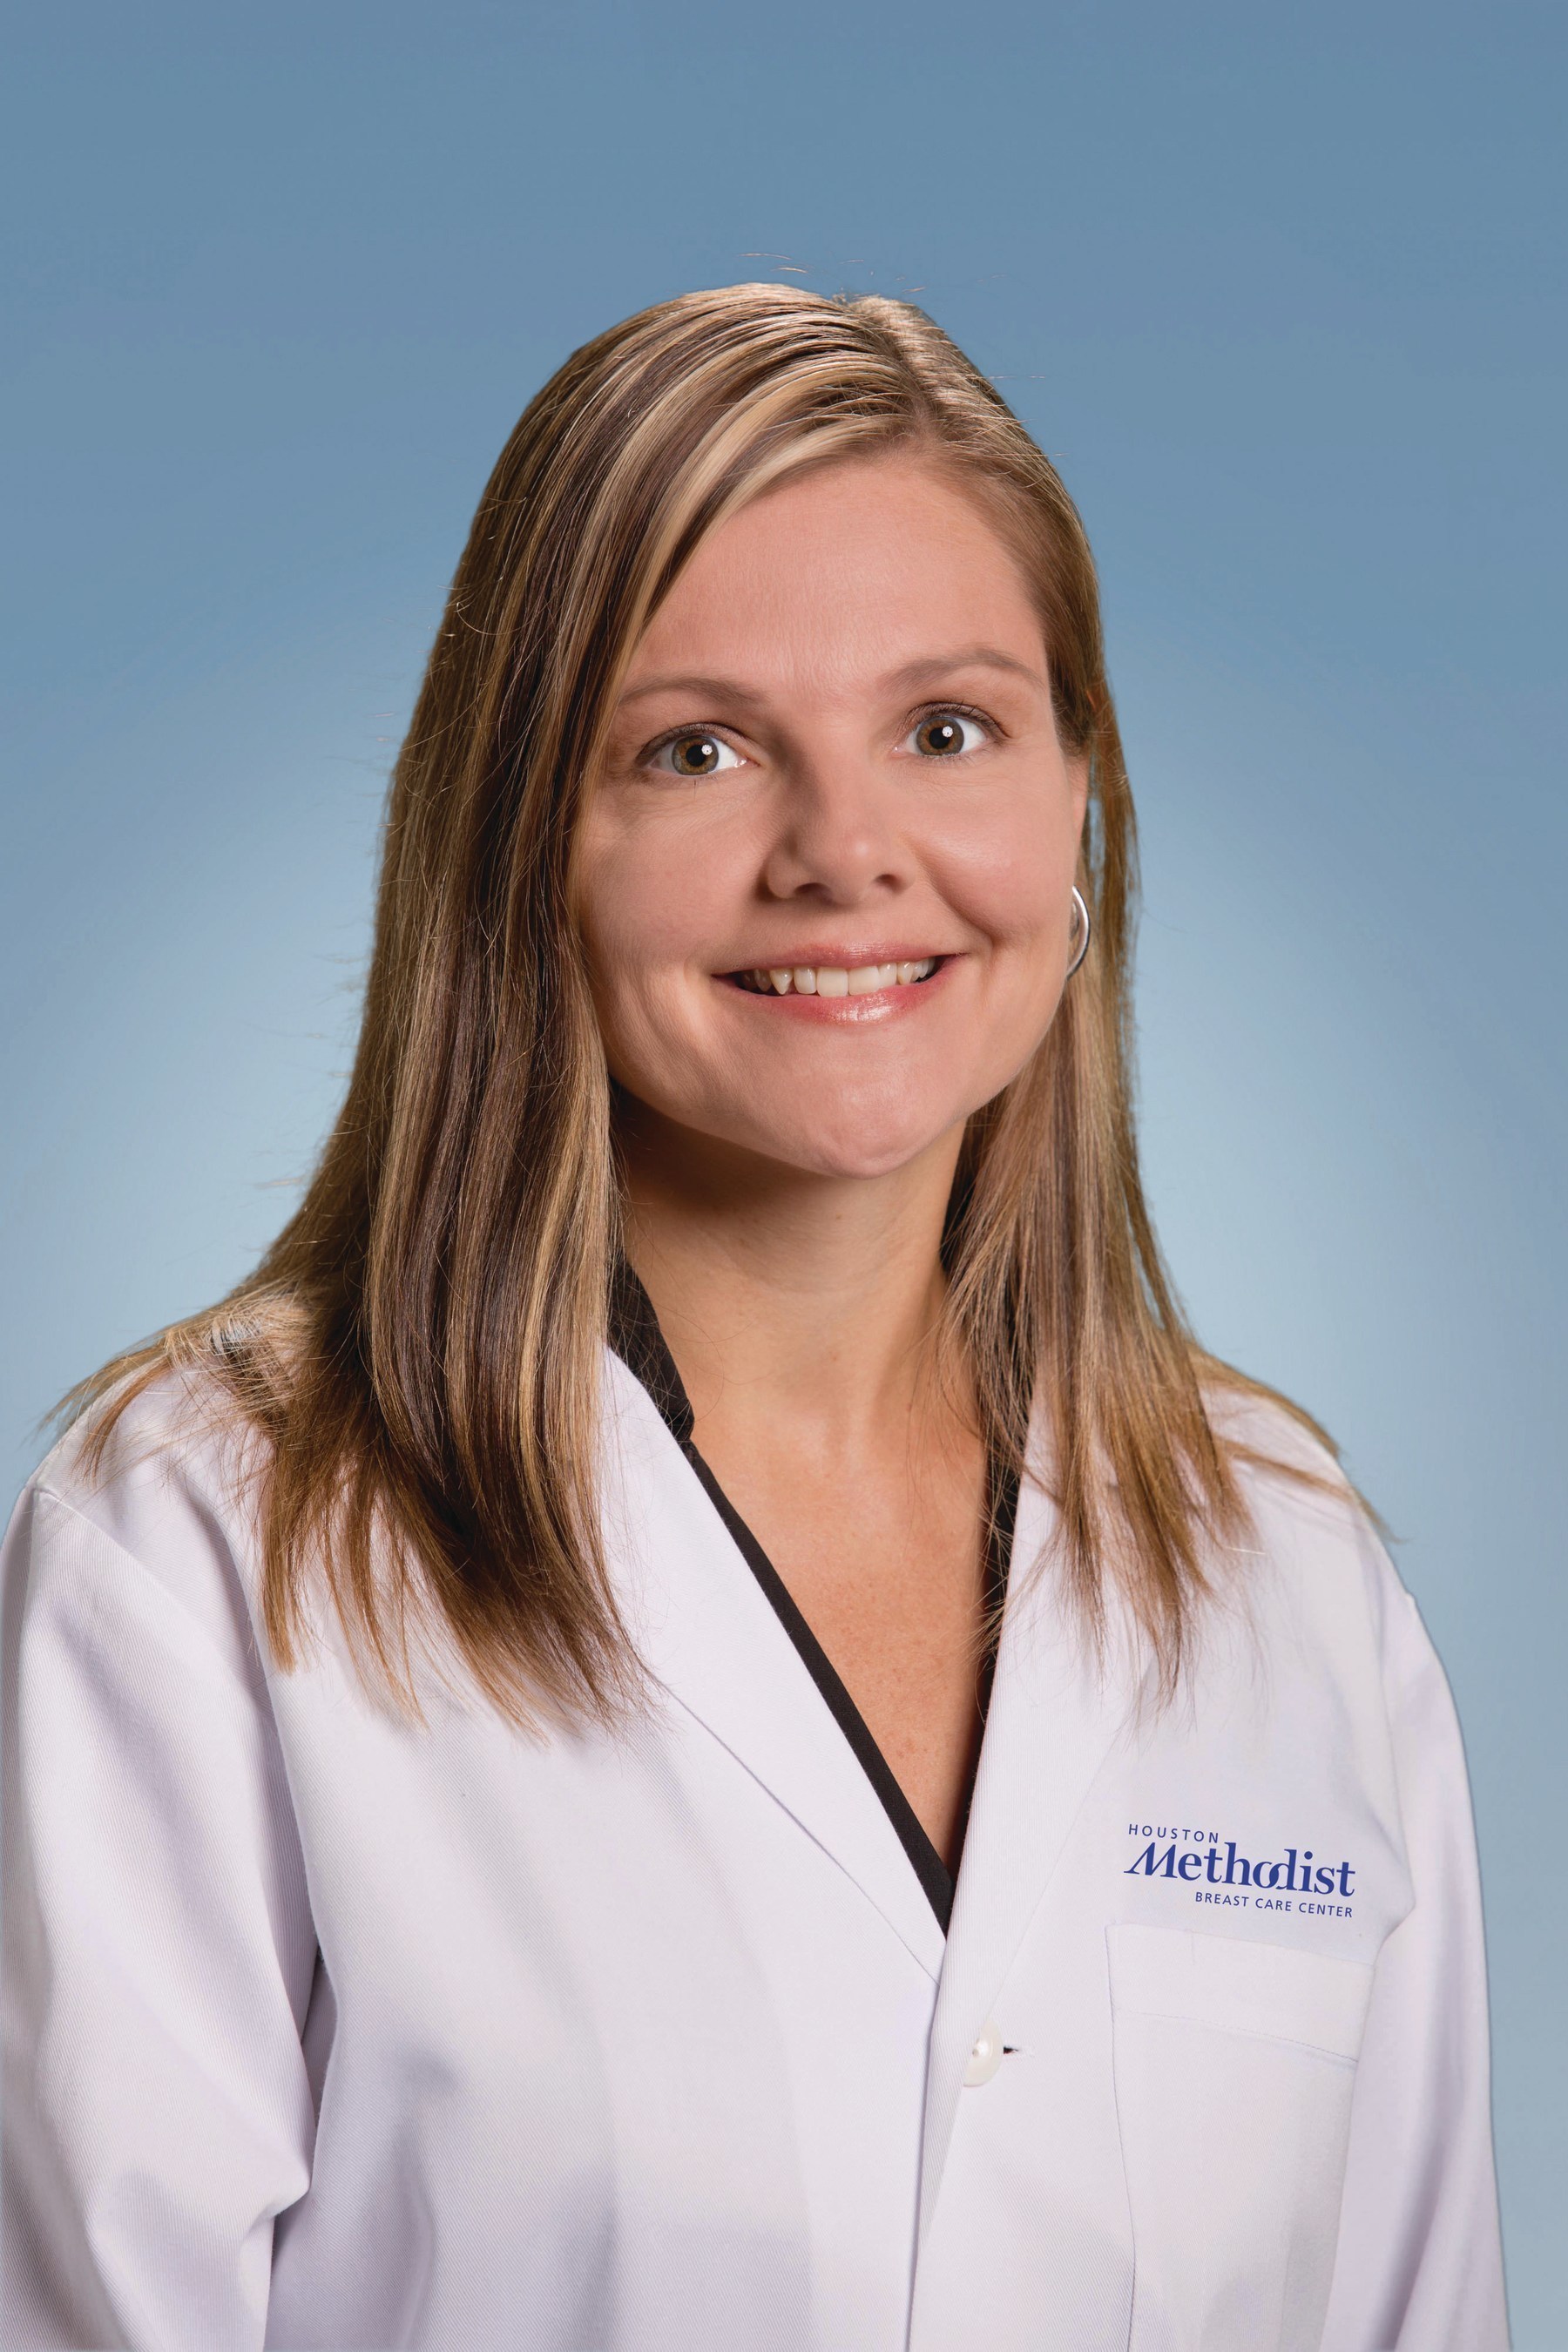 Loren Rourke, breast surgical oncologist, Houston Methodist Willowbrook Hospital and Houston Methodist The Woodlands Hospital is a featured speaker for Paint the Night Pink on October 22 at Houston Methodist Willowbrook Hospital.